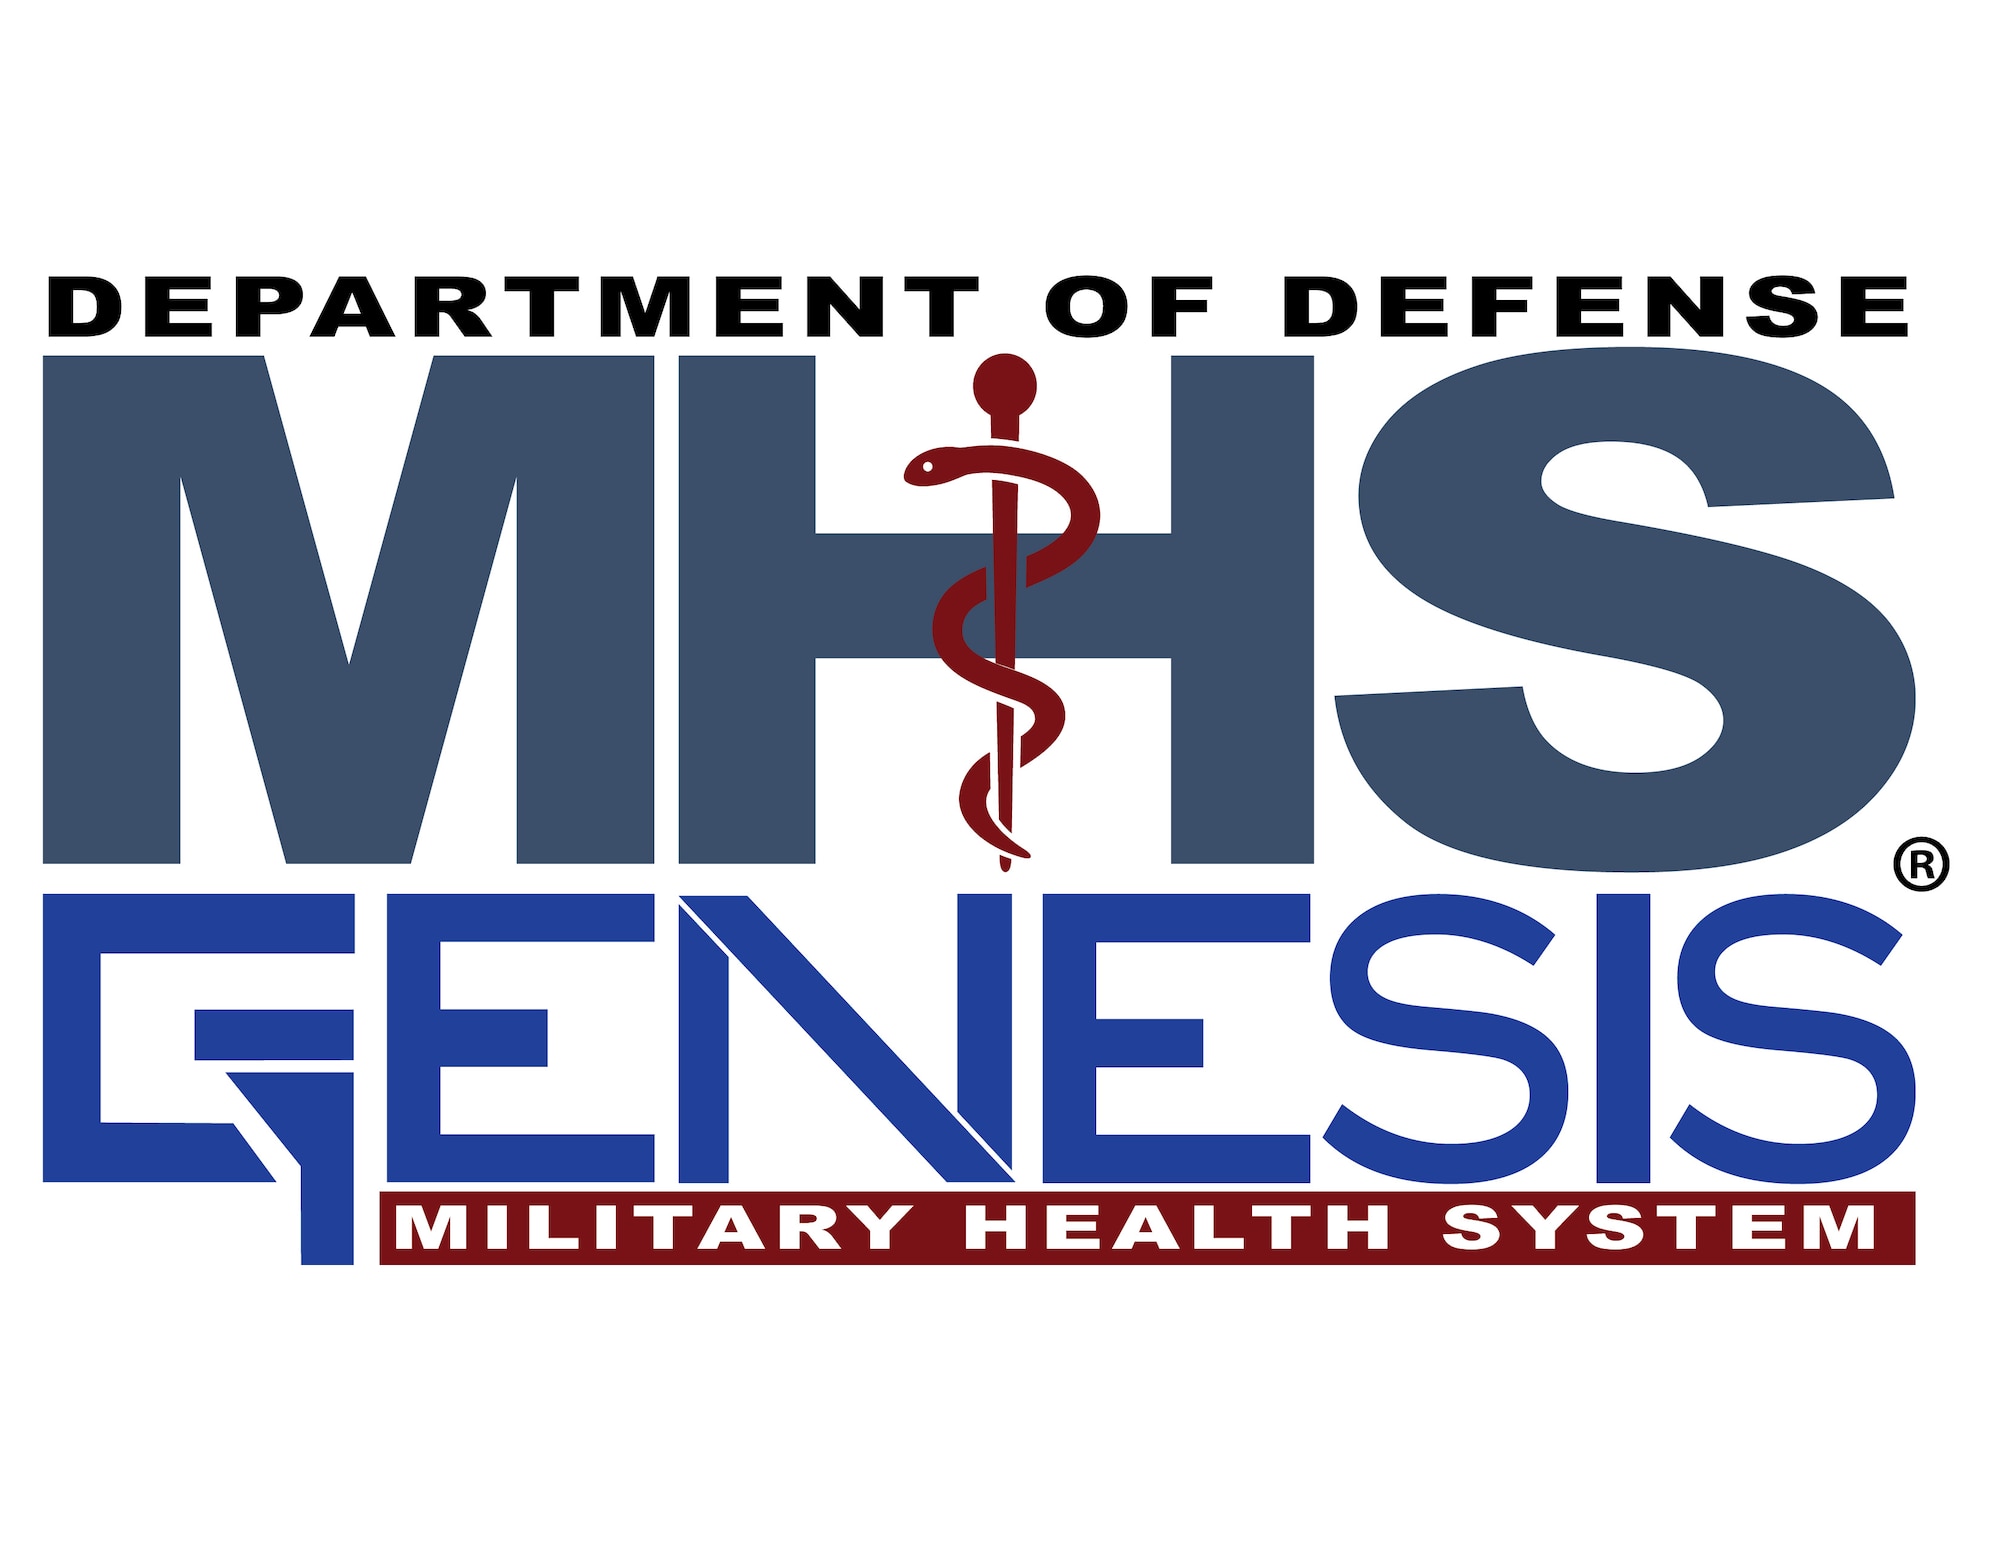 On June 20 the 9th MDG will be going all-digital by transitioning to a new electronic health record called Military Health System GENESIS.